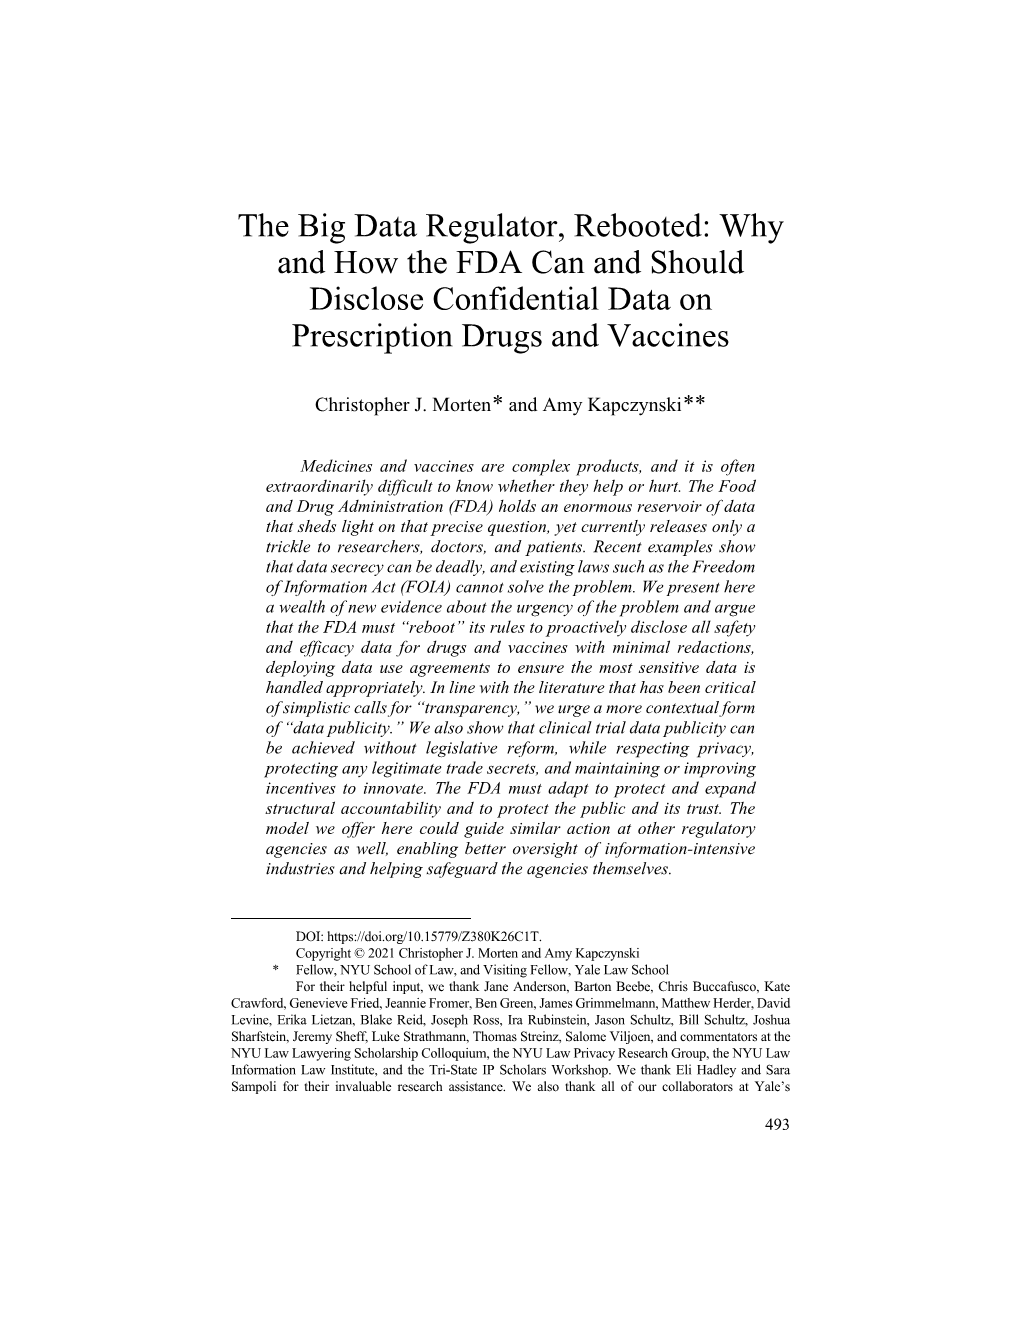 The Big Data Regulator, Rebooted: Why and How the FDA Can and Should Disclose Confidential Data on Prescription Drugs and Vaccines